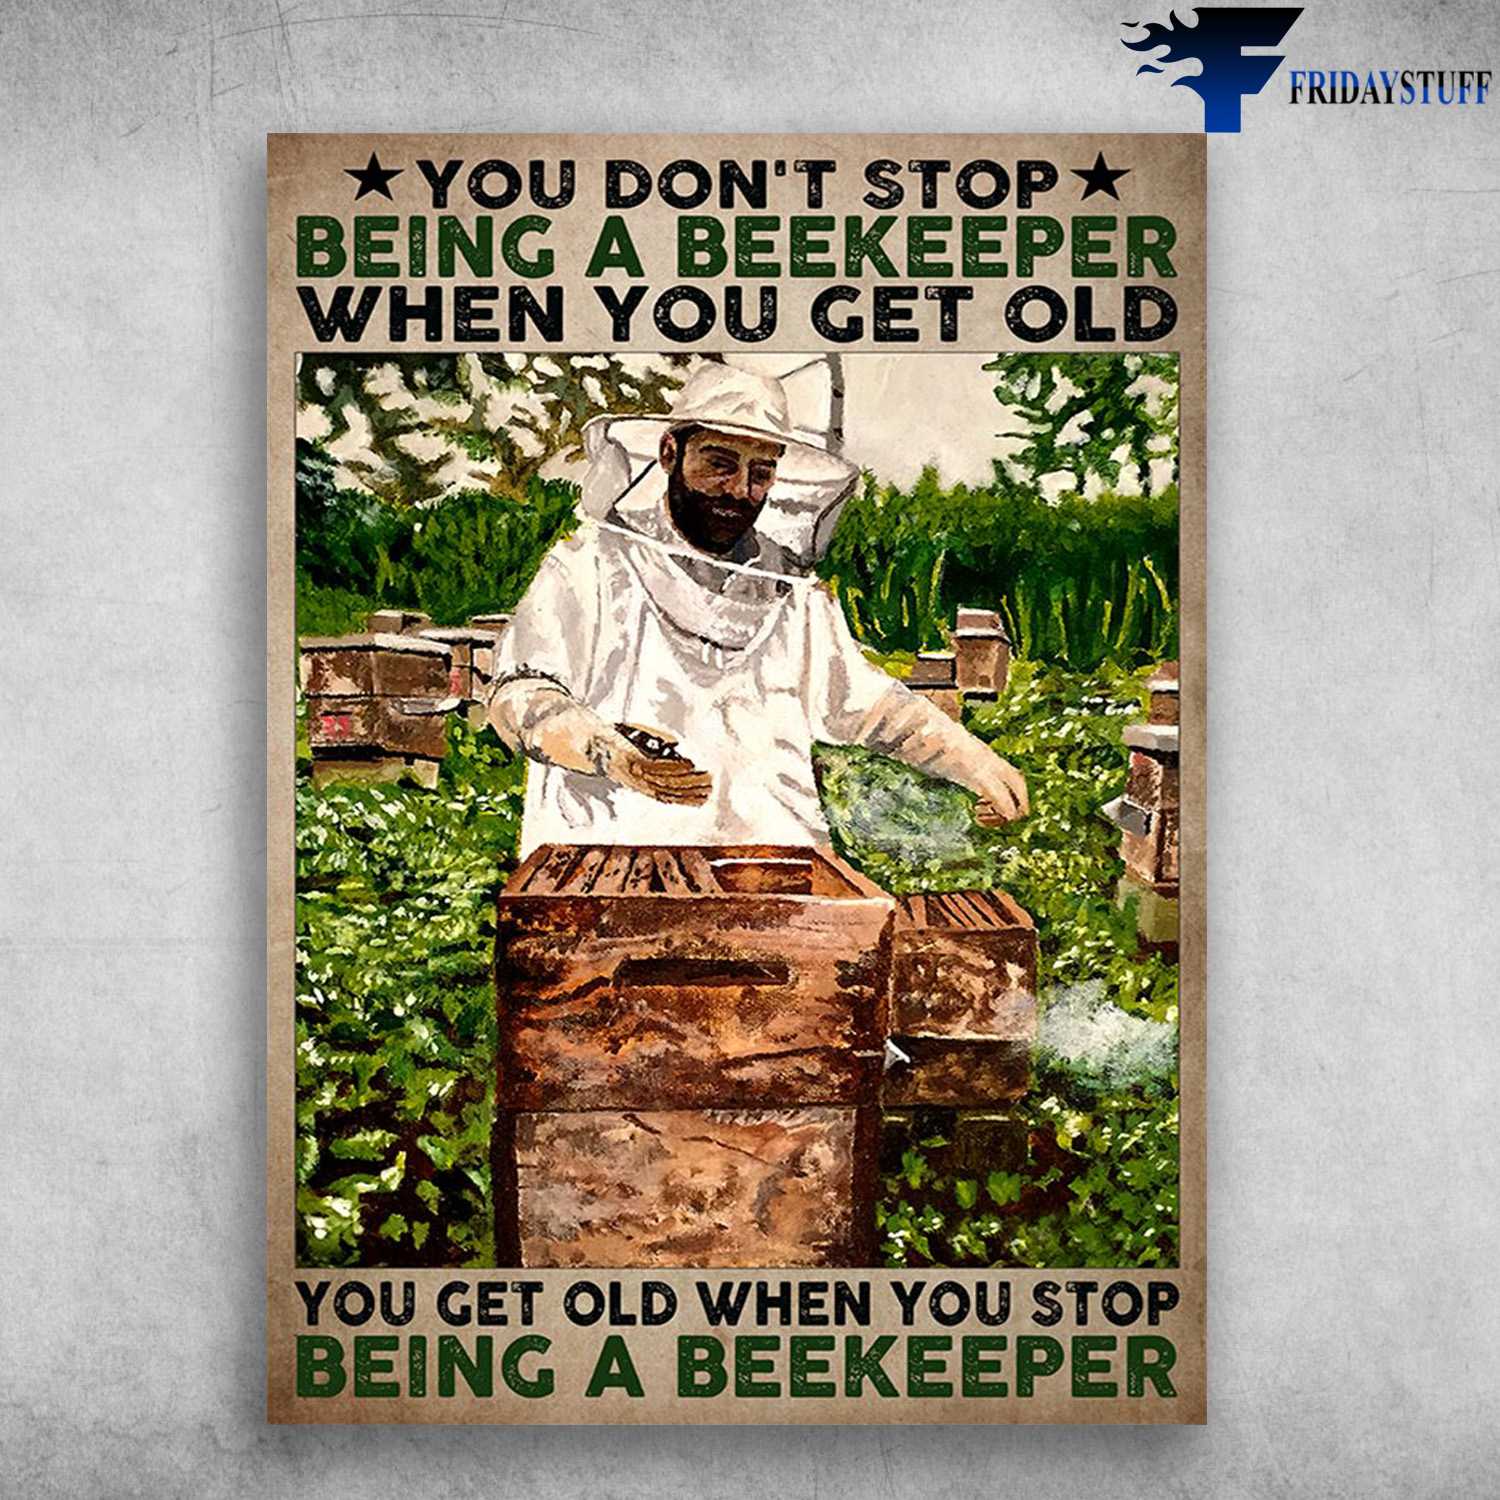 Old Beekeeper - You Don't Stop Being A Beekeeper When You Get Old, You Get Old When You Stop Being A Beekeeper